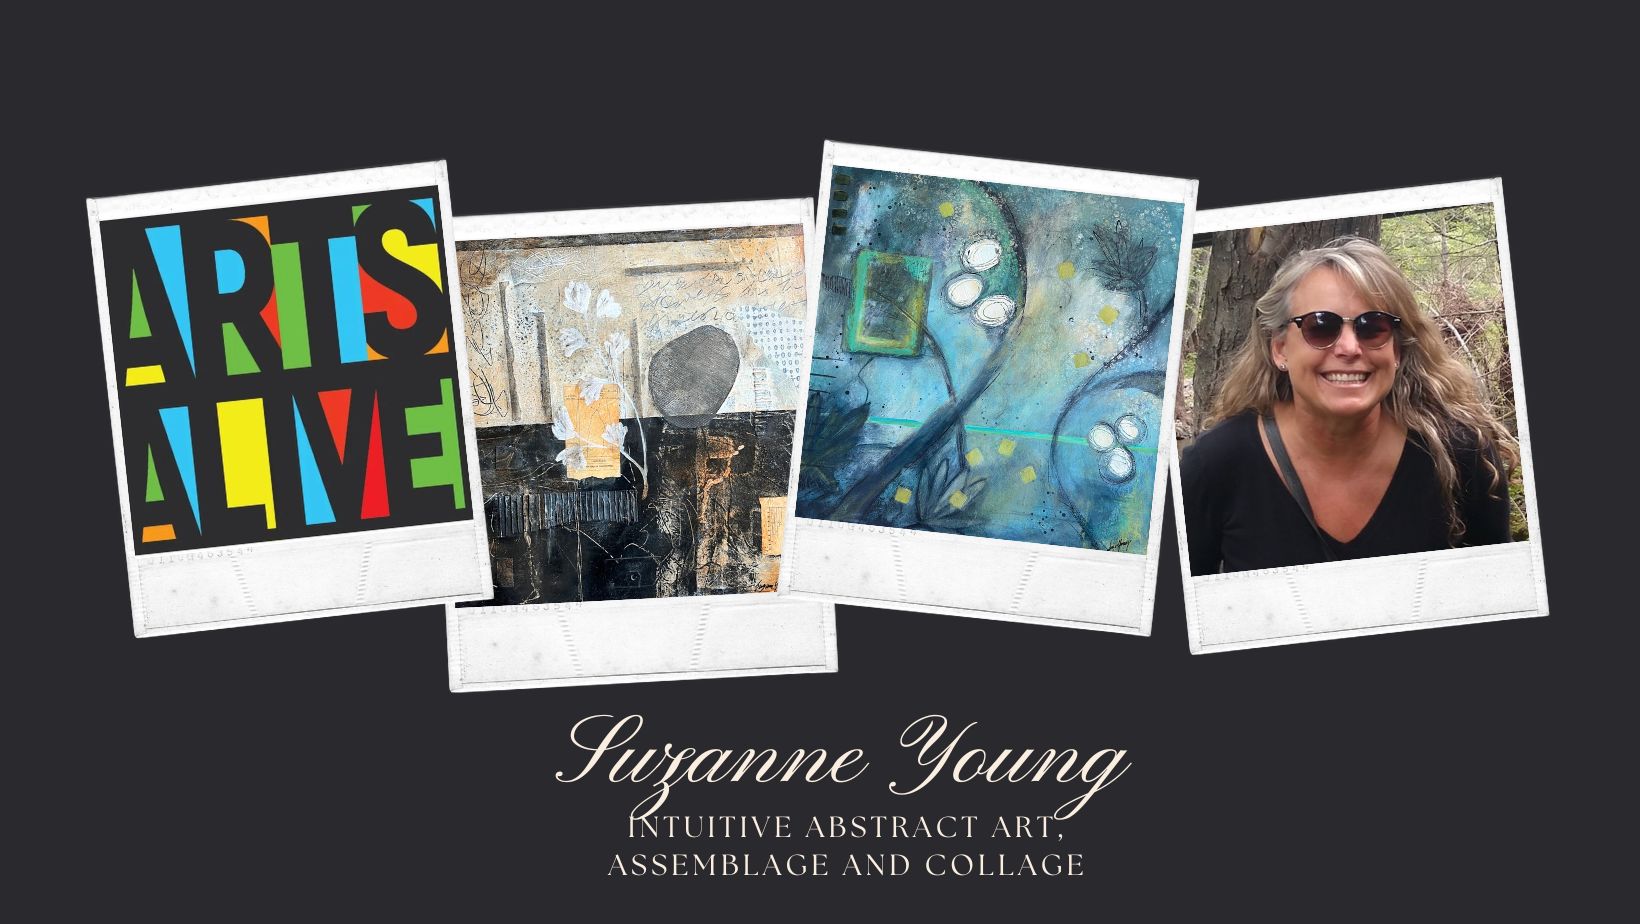 Suzanne Young - Arts Alive